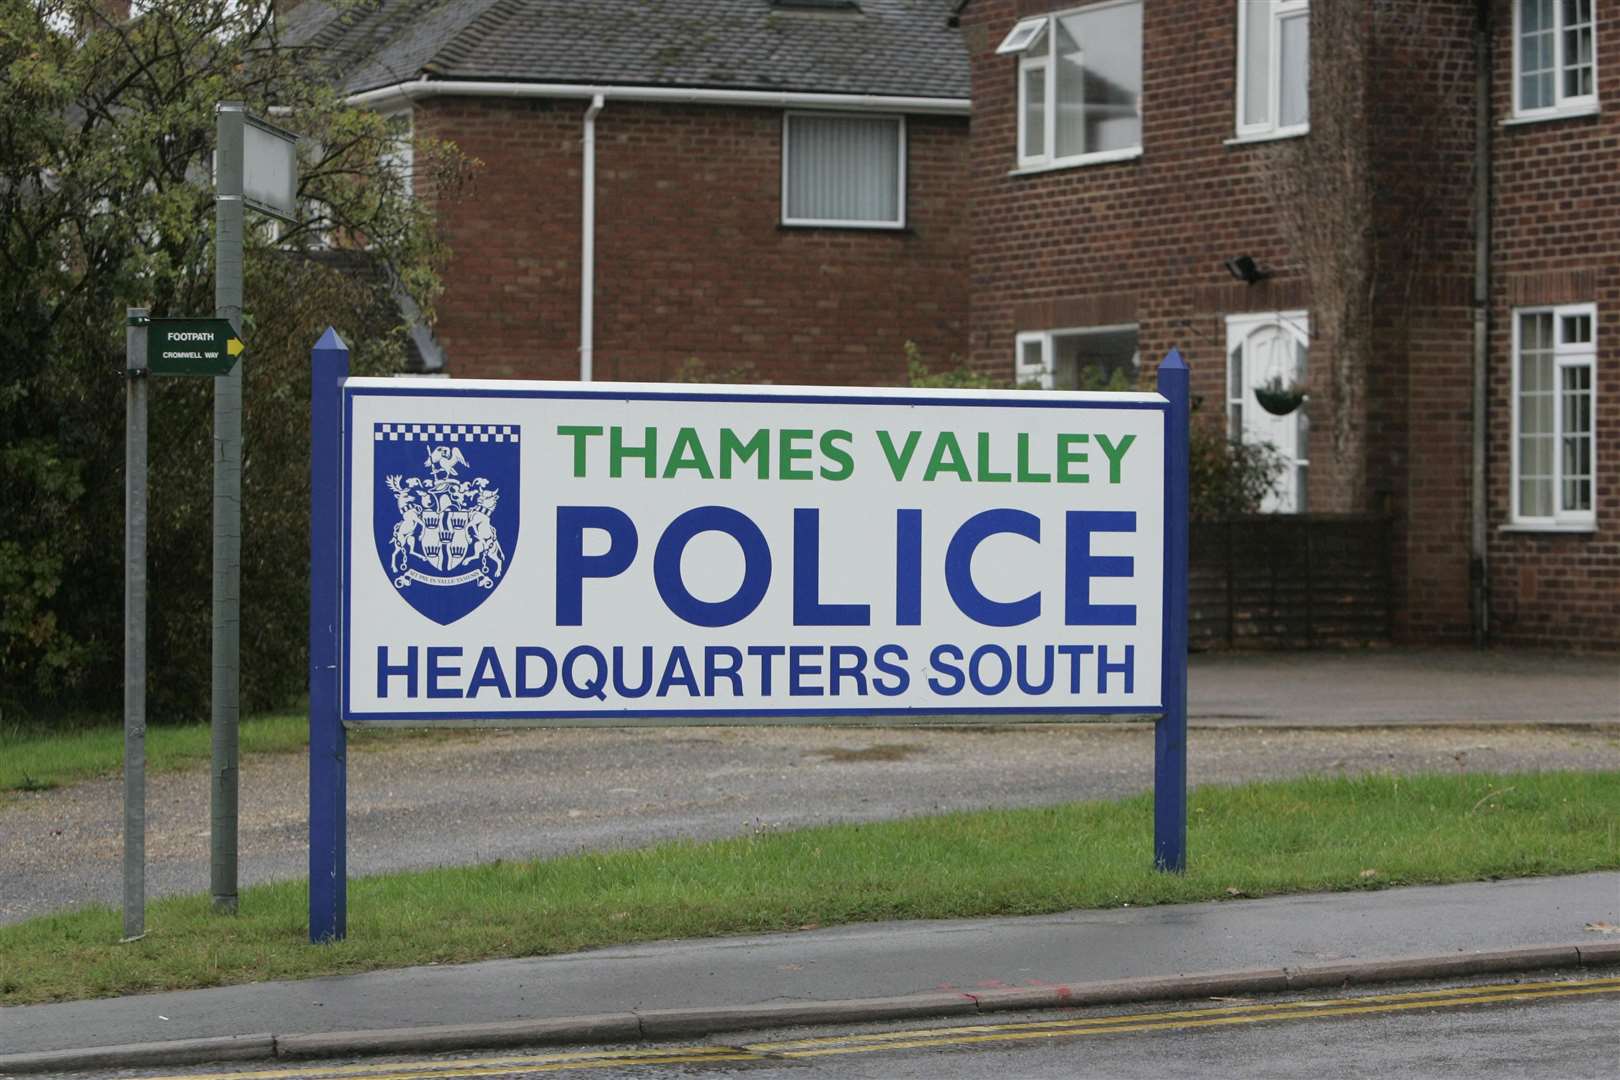 Inspectors said Thames Valley police had taken immediate action to boost staff numbers in the multi-agency teams who deal with vulnerable people (Tim Ockenden/PA)